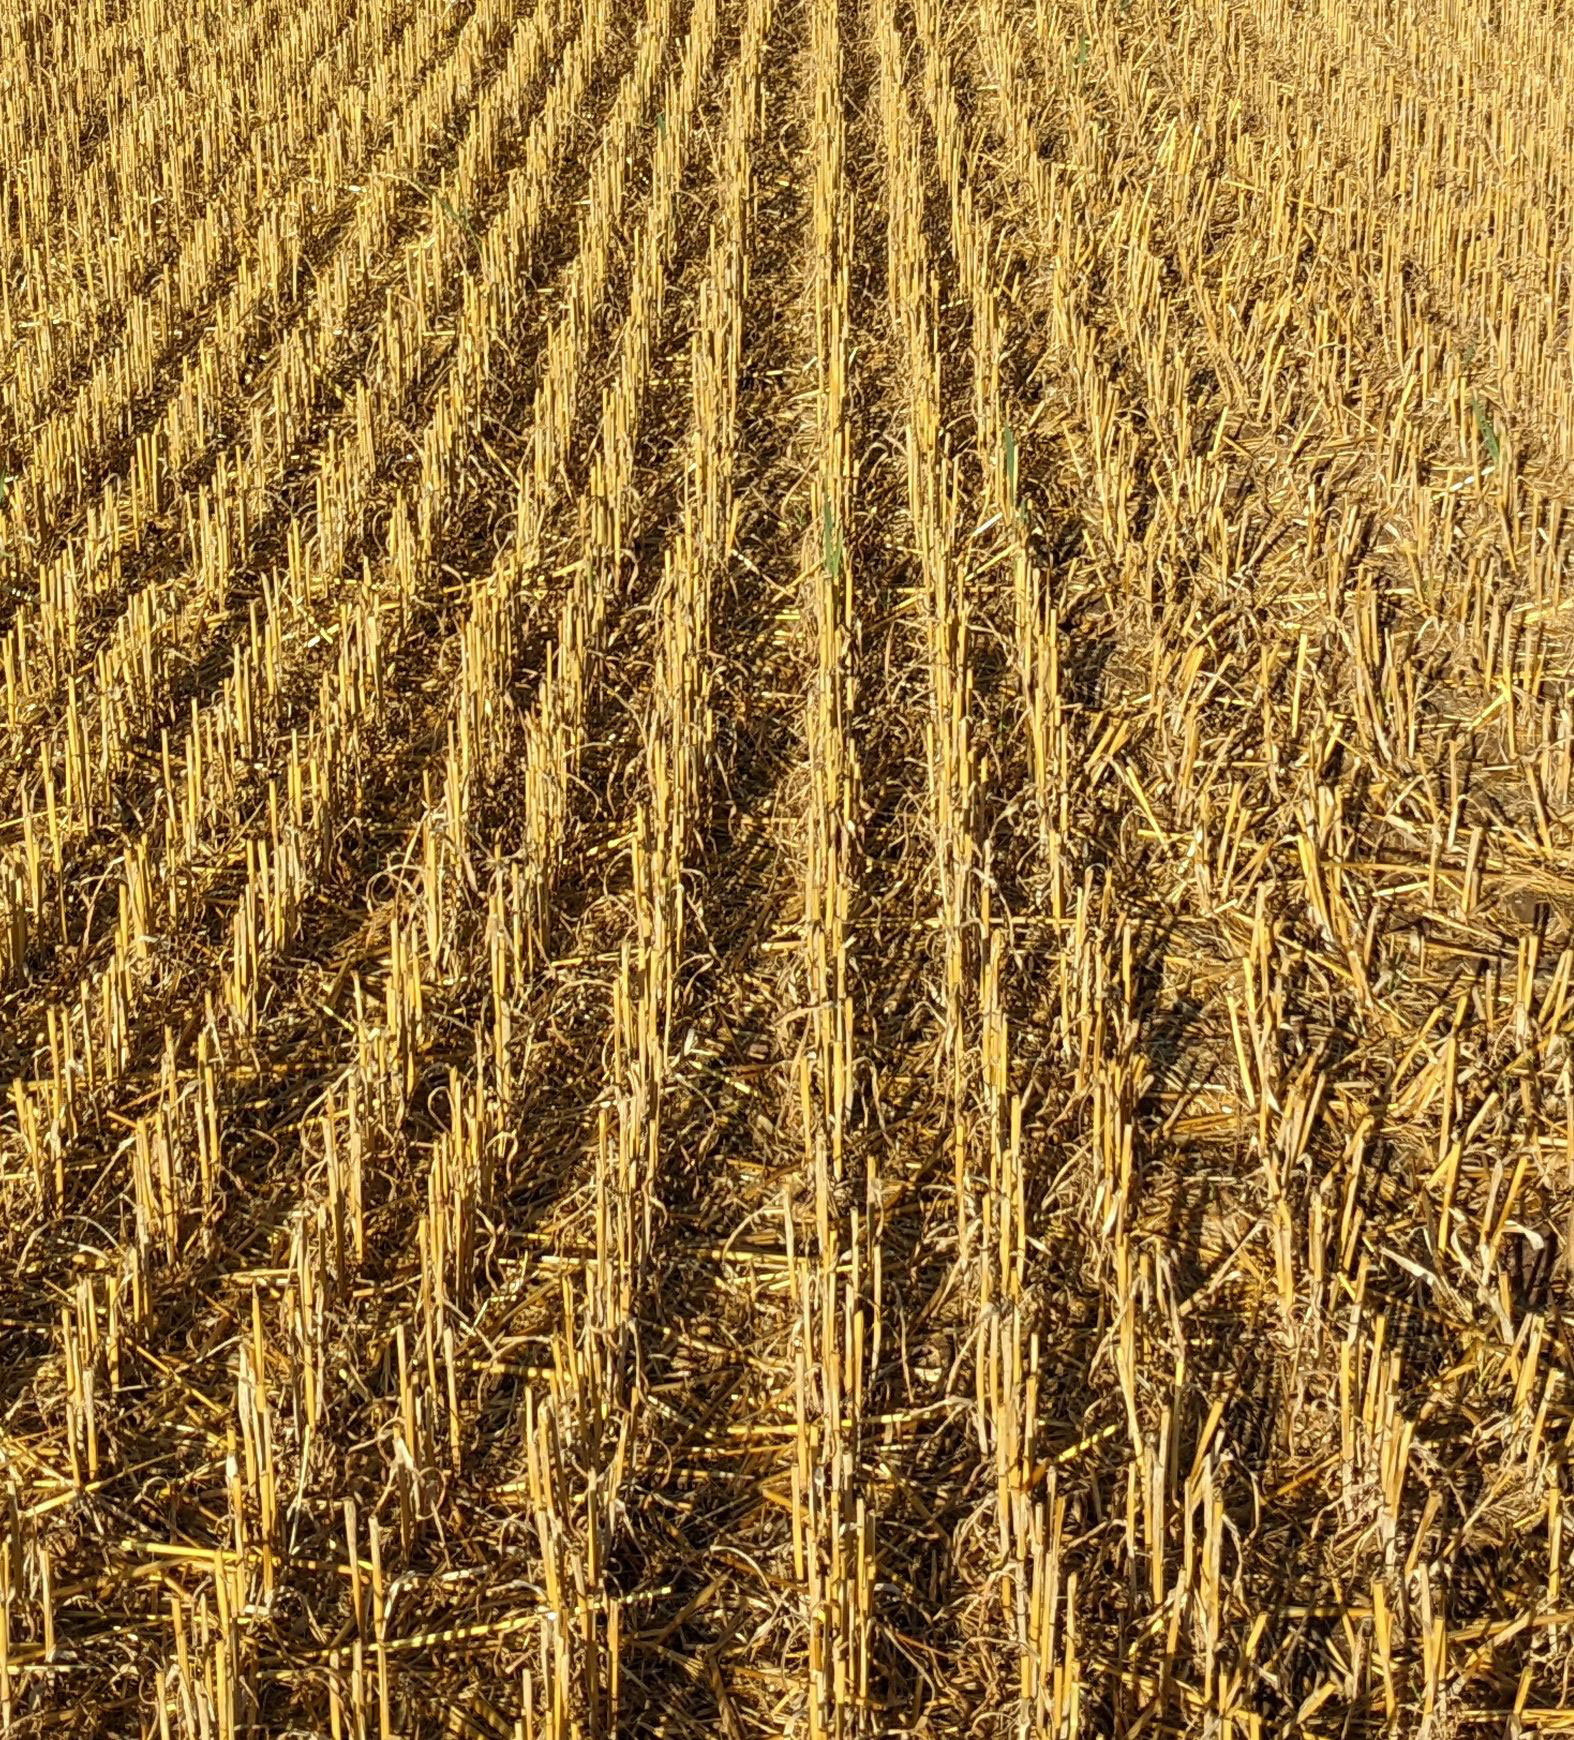 Oat stubble with 12.5 cm row width (A) on 28th August 2022